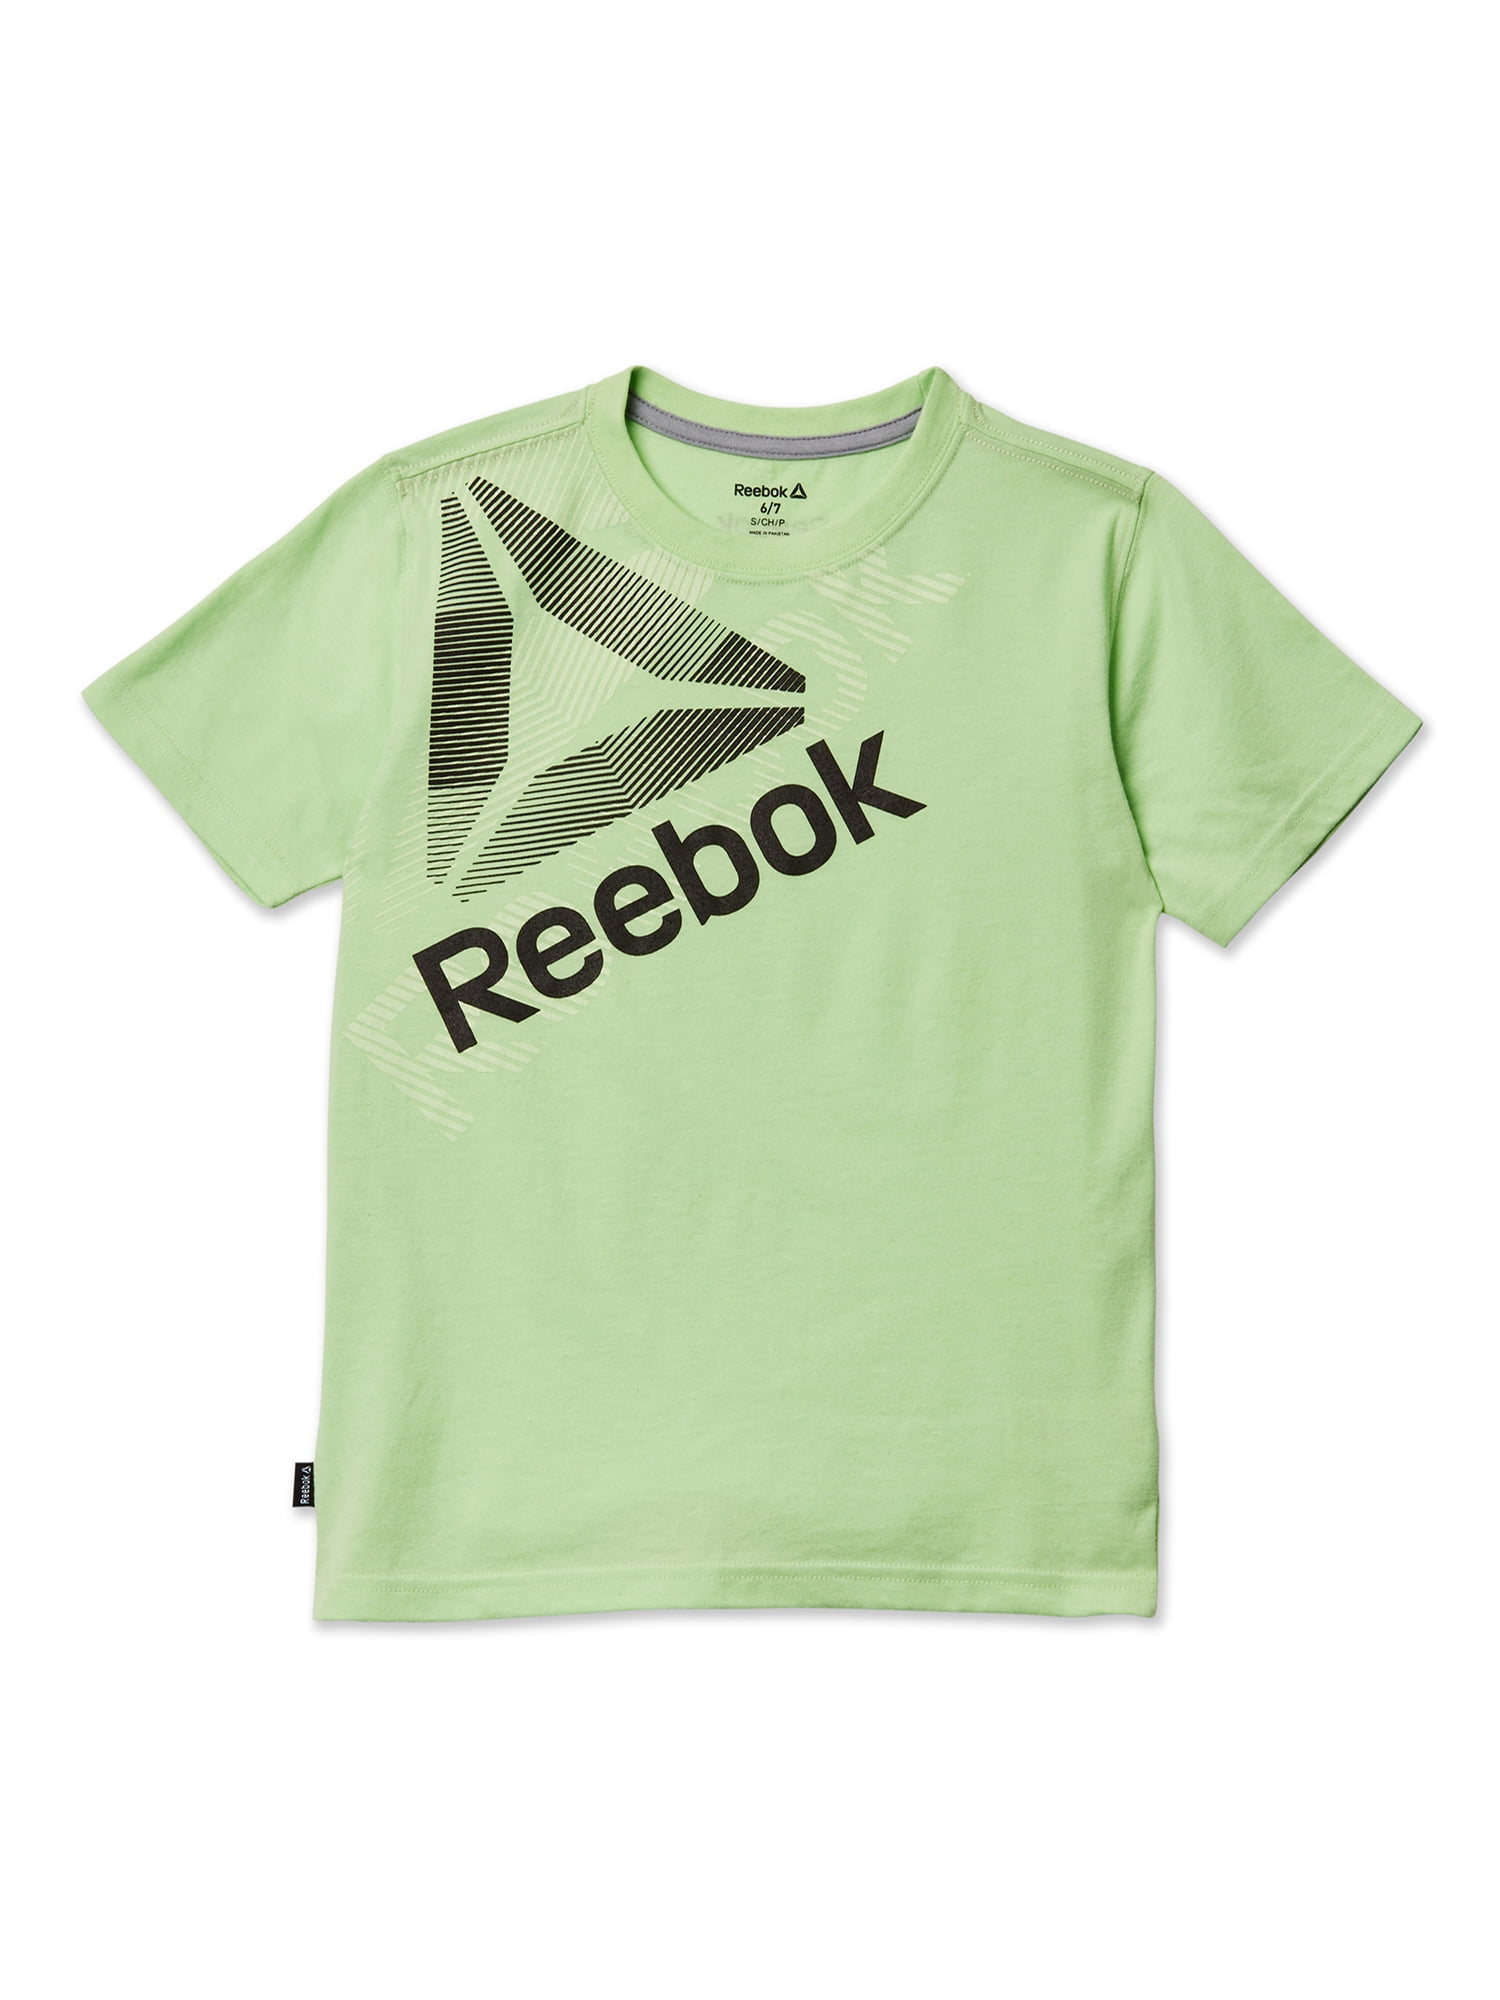  Reebok Boys' Little Big Logo Color Block T-Shirt, True red, 4:  Clothing, Shoes & Jewelry